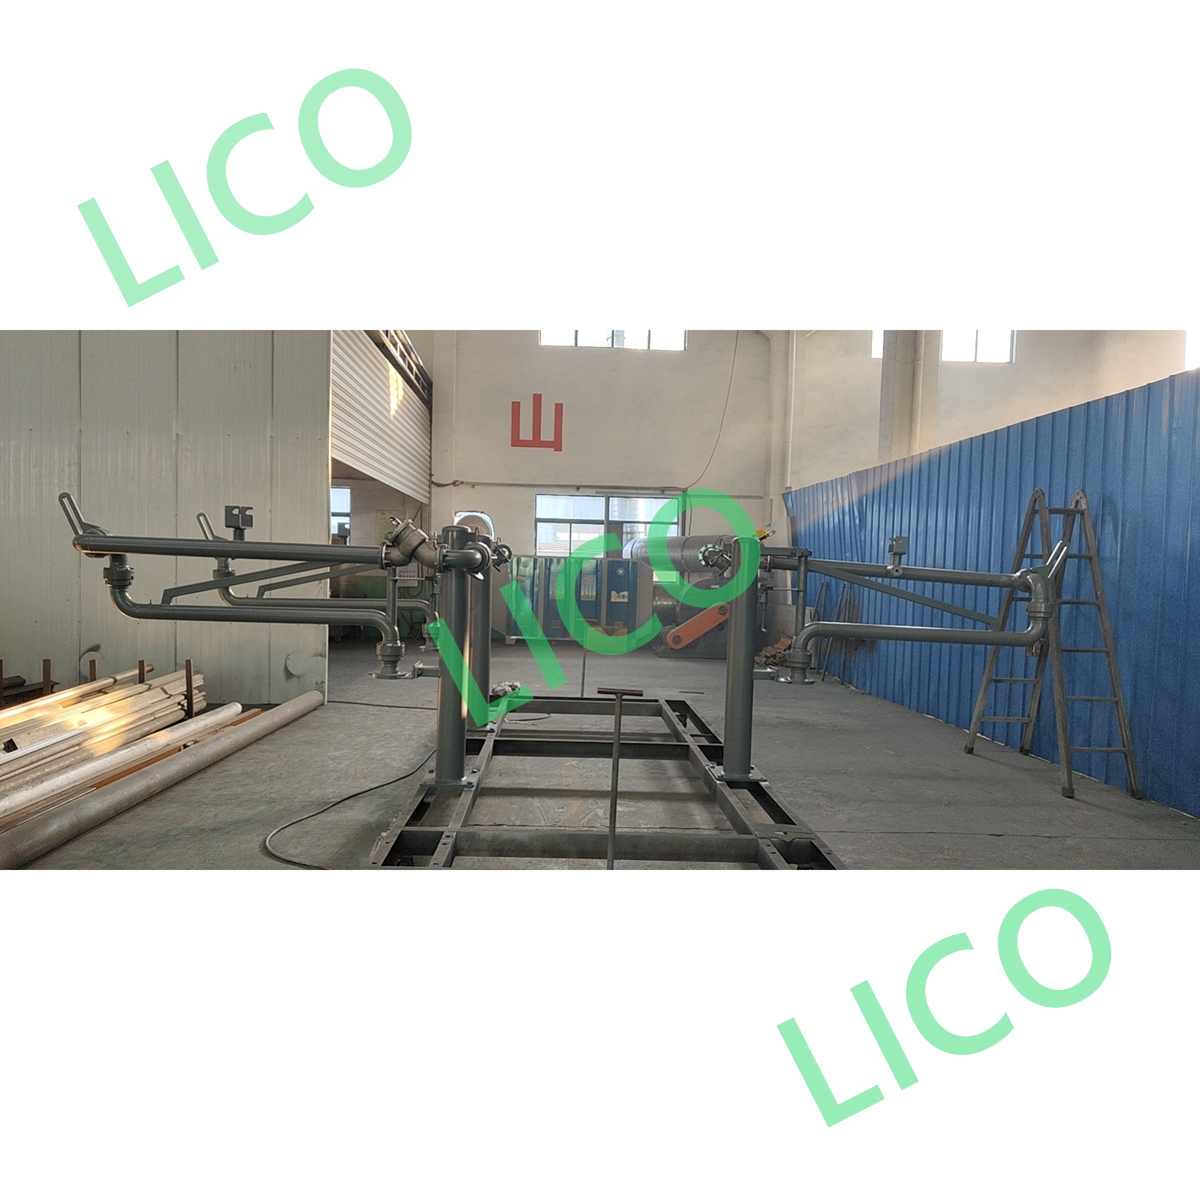 Fuel With Liquid Level Alarm Top Loading Arm for Chemical Industry